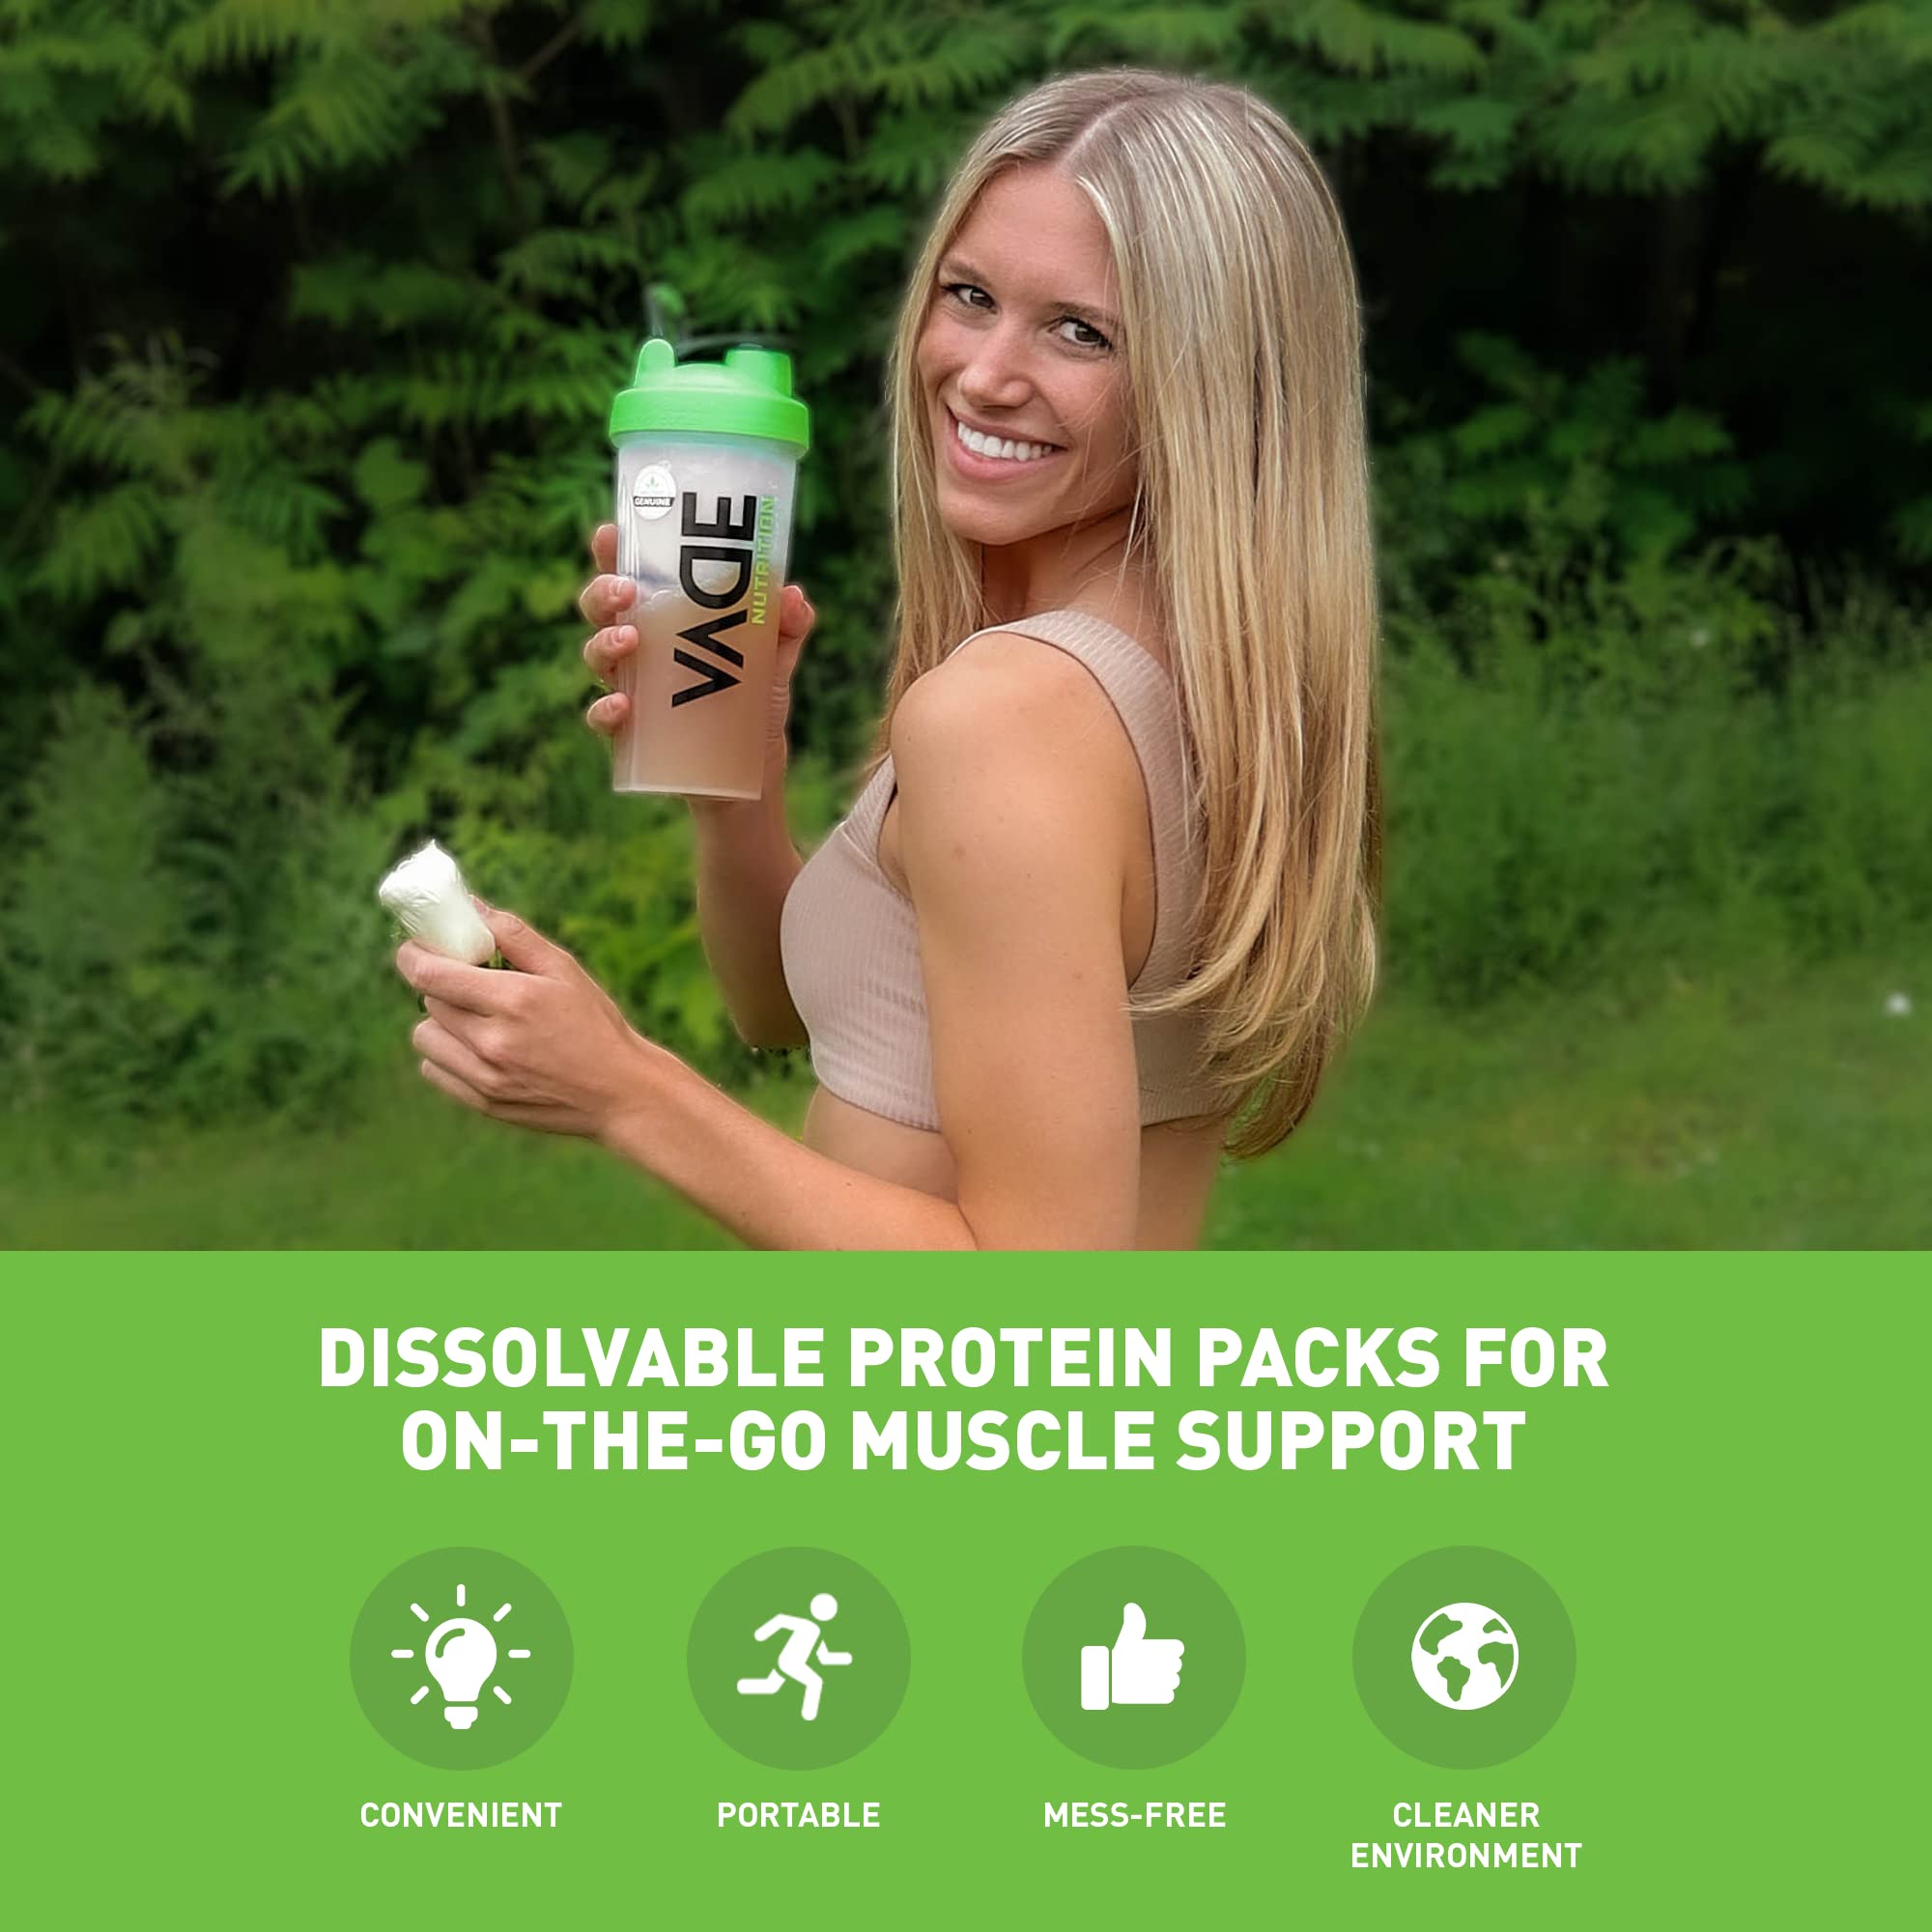 Vade Nutrition Dissolvable Protein Packs | Whey Isolate Protein Powder, On-The-Go, Low Carb, Low Calorie, Lactose Free, Gluten Free, Fat Free, Sugar Free, Lean, Great Tasting (16 Servings, Cappuccino)